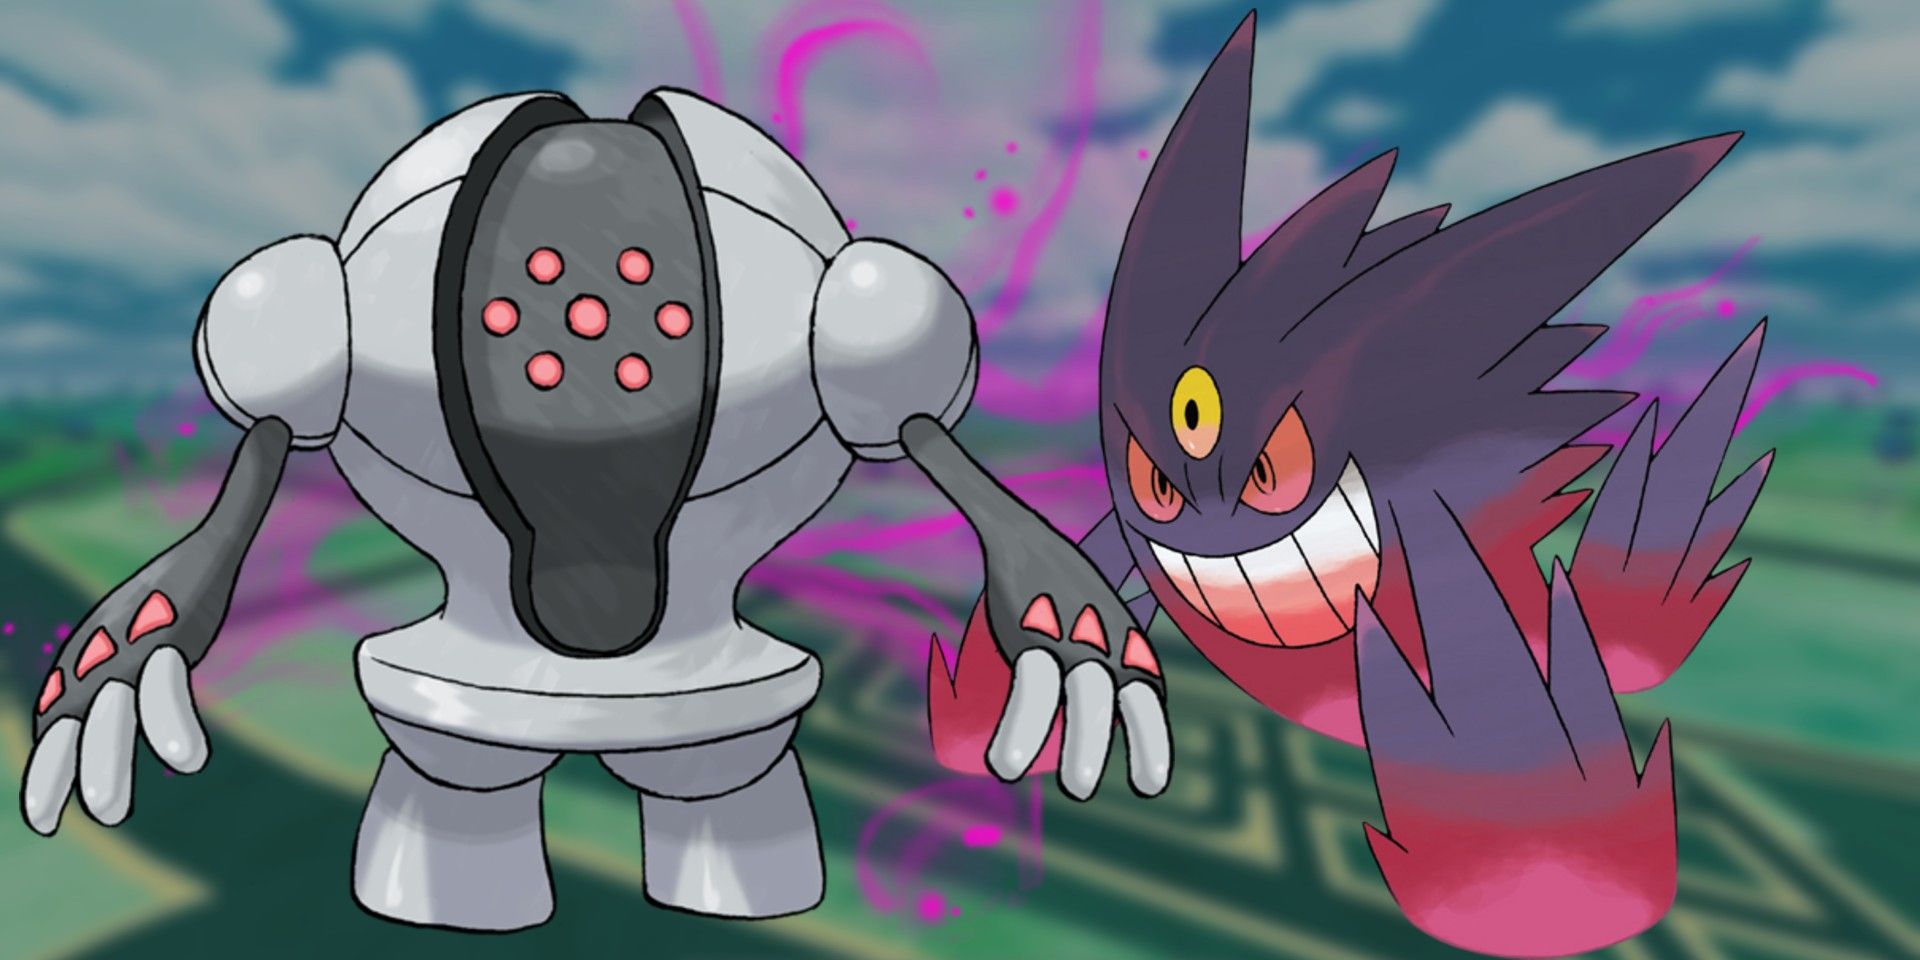 Registeel and Mega Gengar with Pokemon GO's map blurred-out in the background.